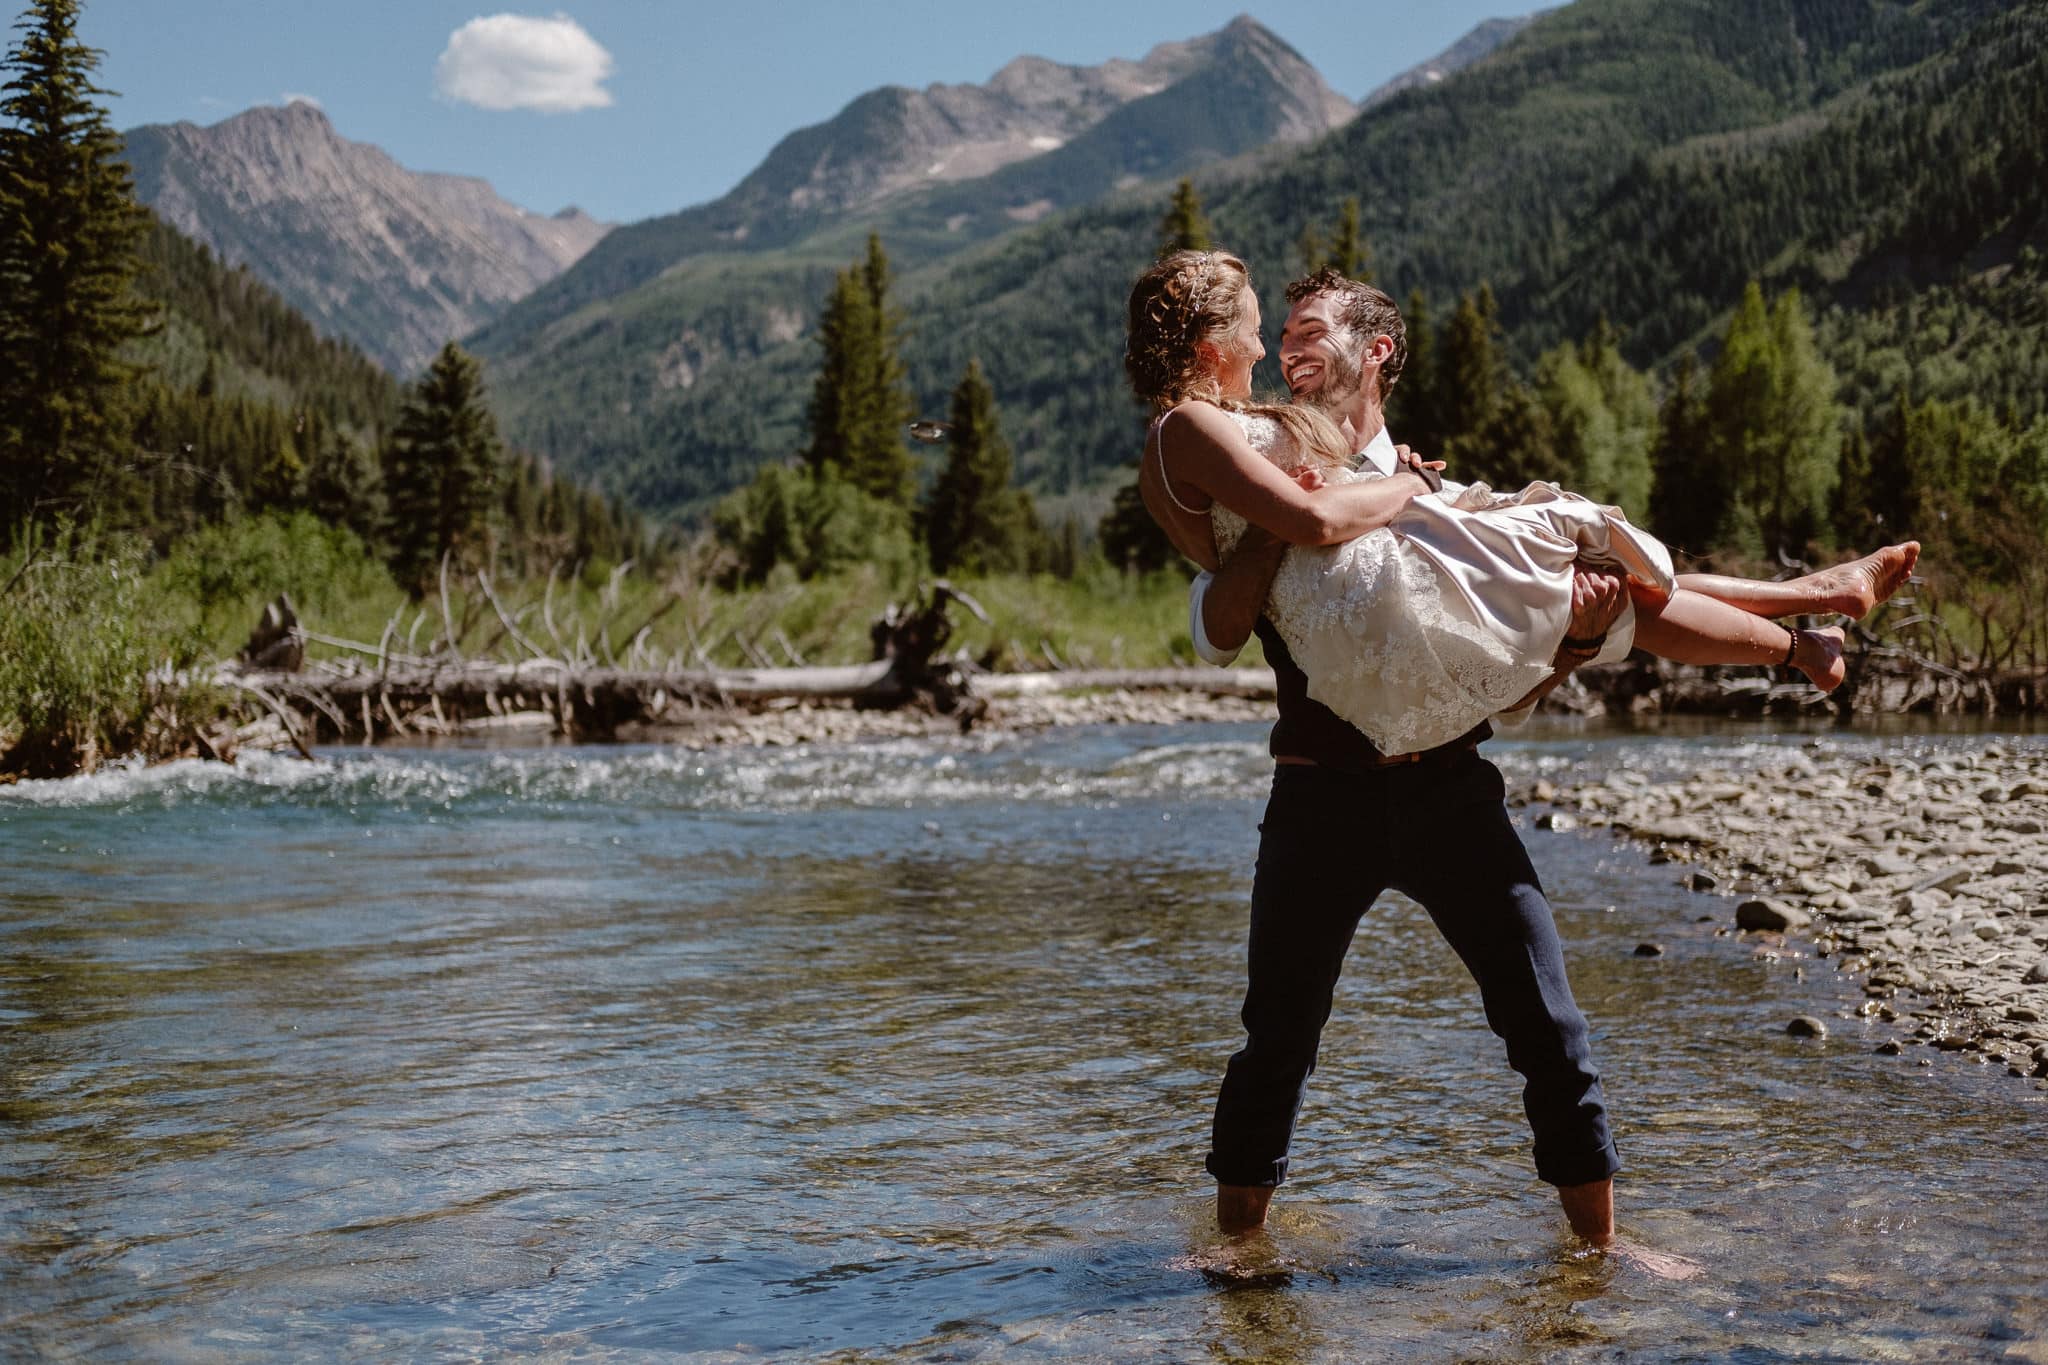 Redstone Inn wedding photographer, Carbondale wedding photographer, Colorado intimate wedding photographer, bride and groom portraits by river in mountains